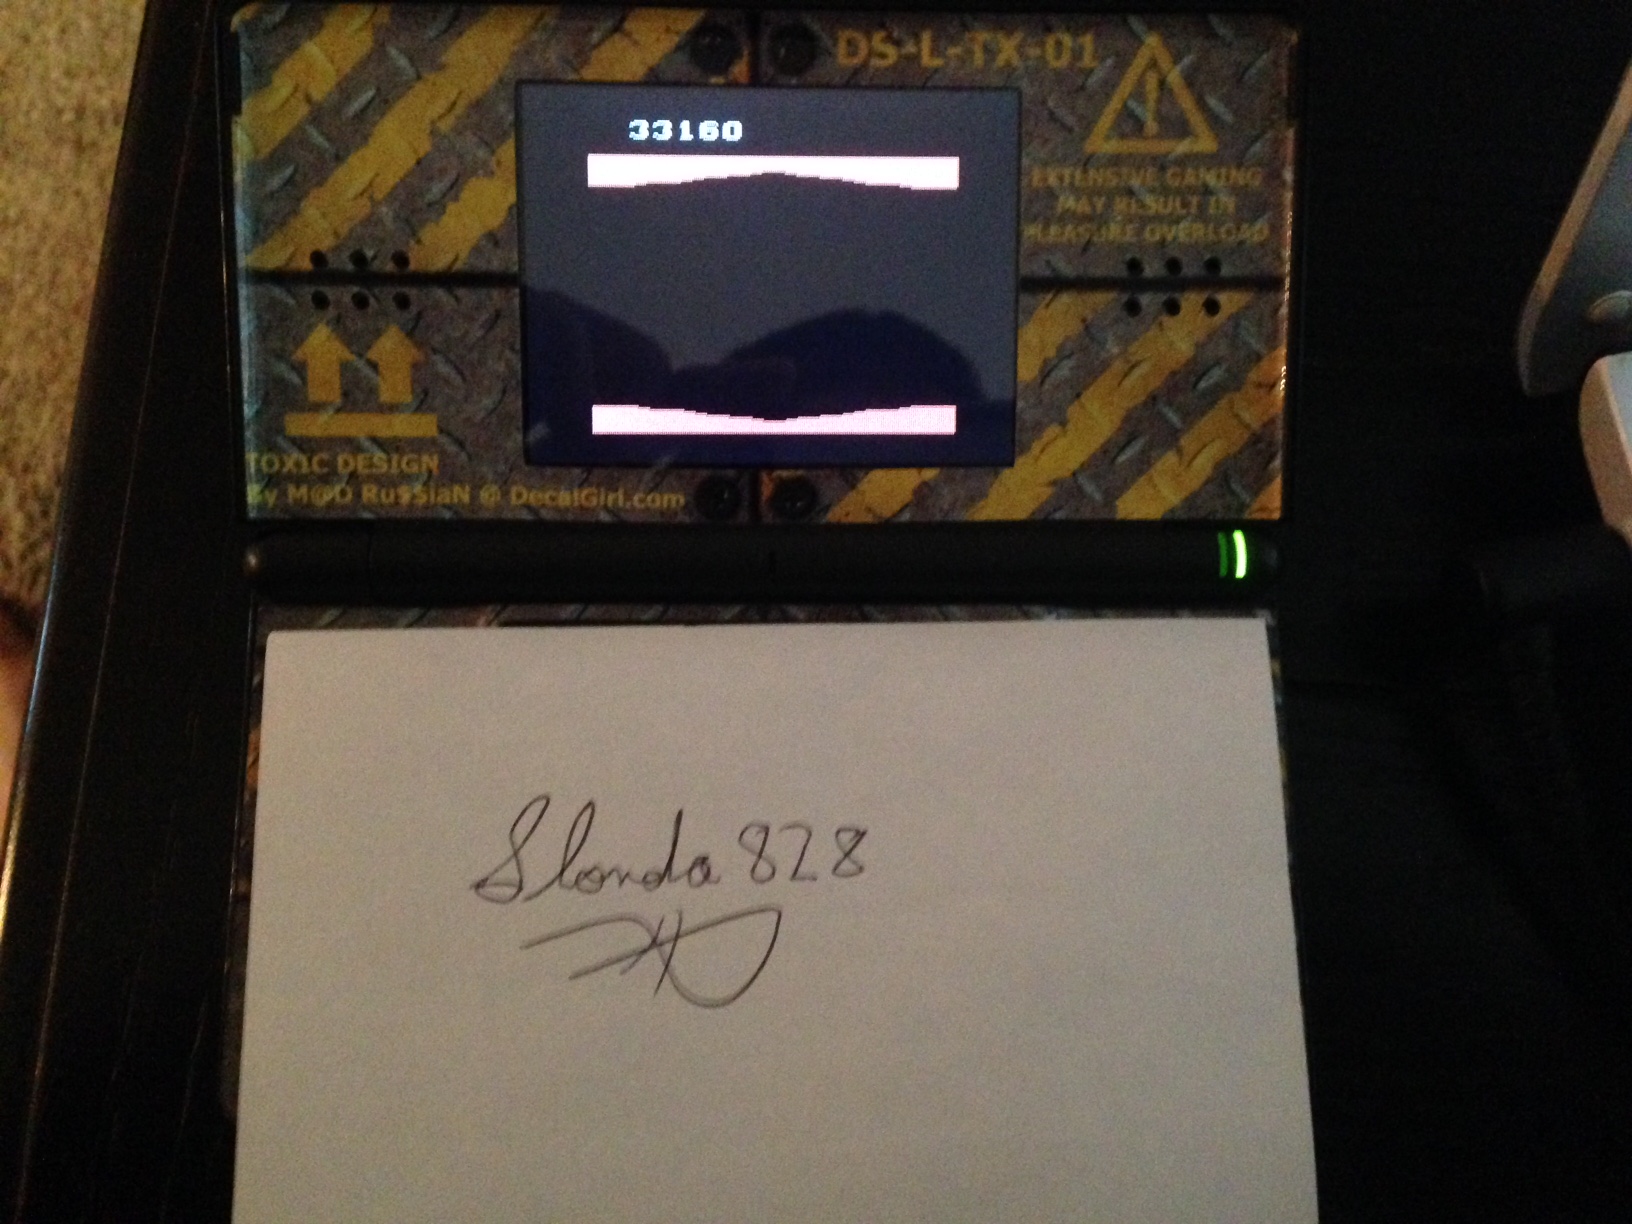 slonda828: Activision Anthology: Plaque Attack [Game 1B] (GBA) 33,160 points on 2014-12-21 11:48:03